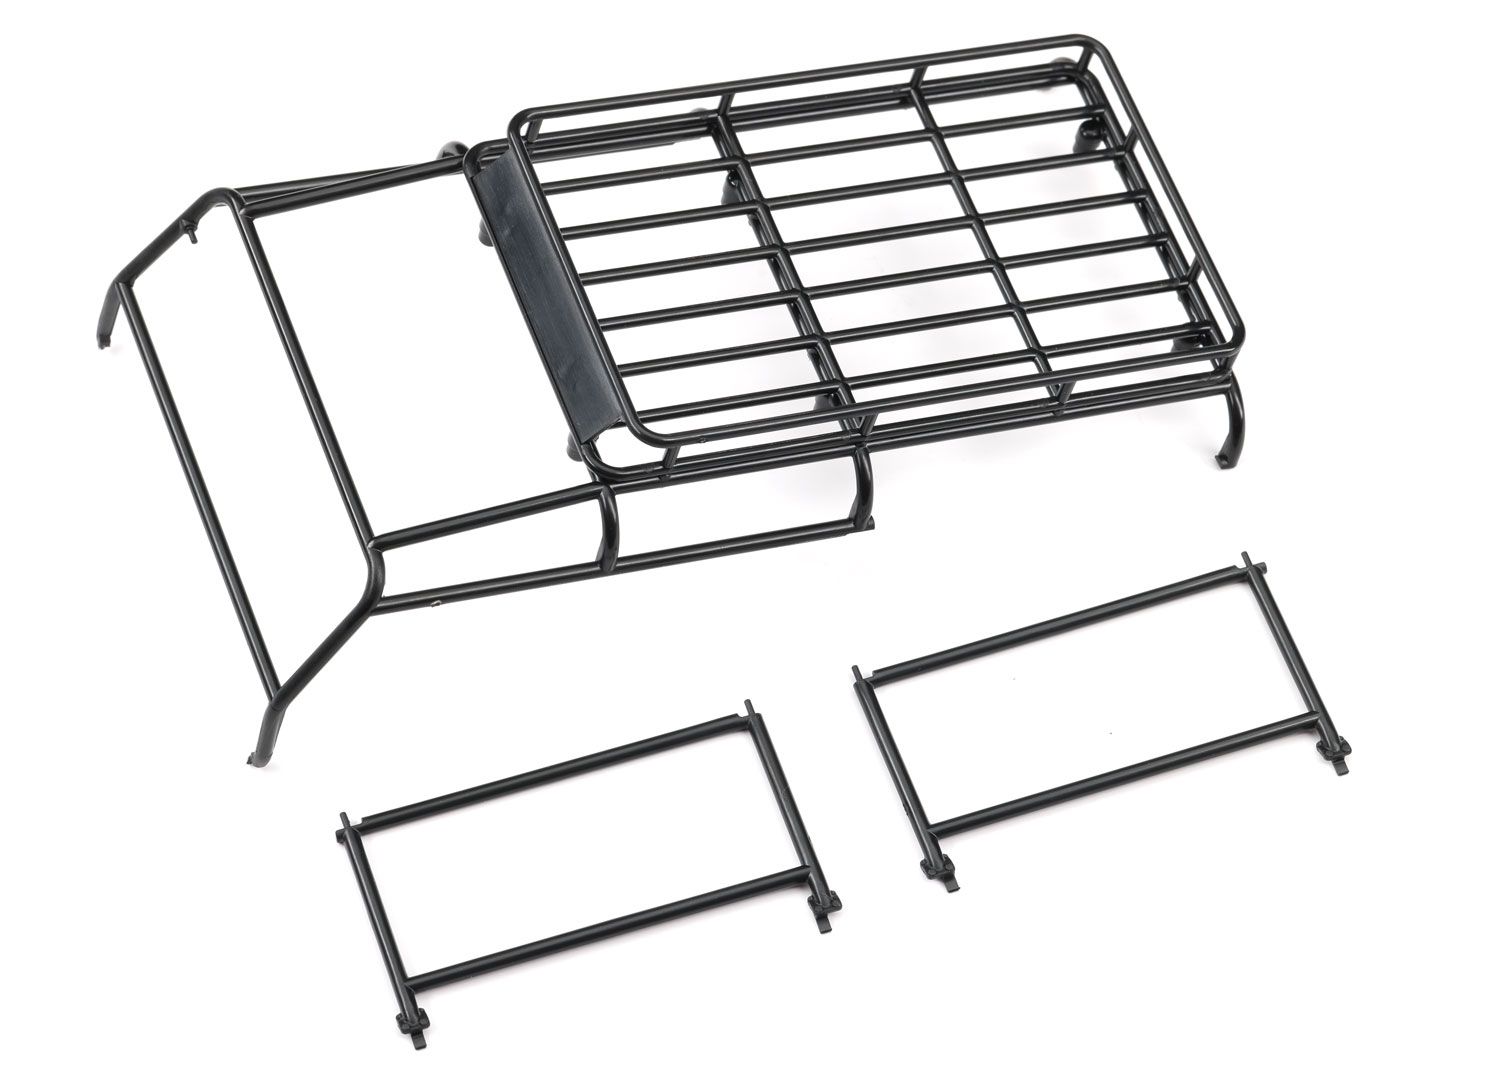 Traxxas TRX-4M Defender Body Exocage/Roof Basket